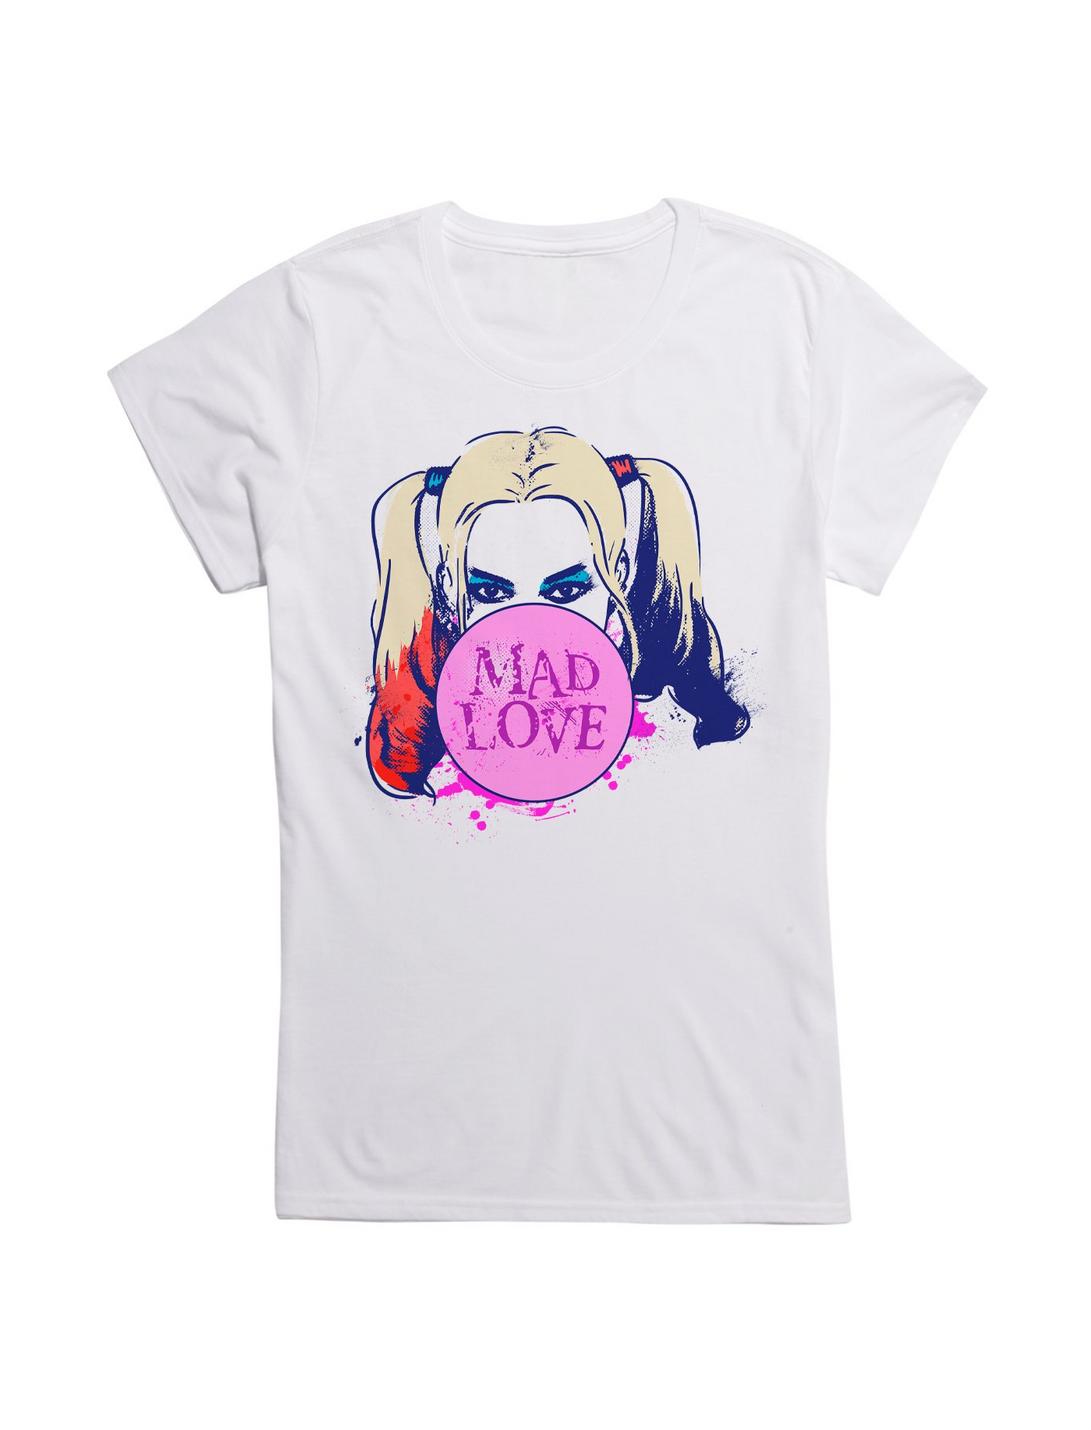 DC Comics Suicide Squad Harley Mad Love Girls T-Shirt, WHITE, hi-res